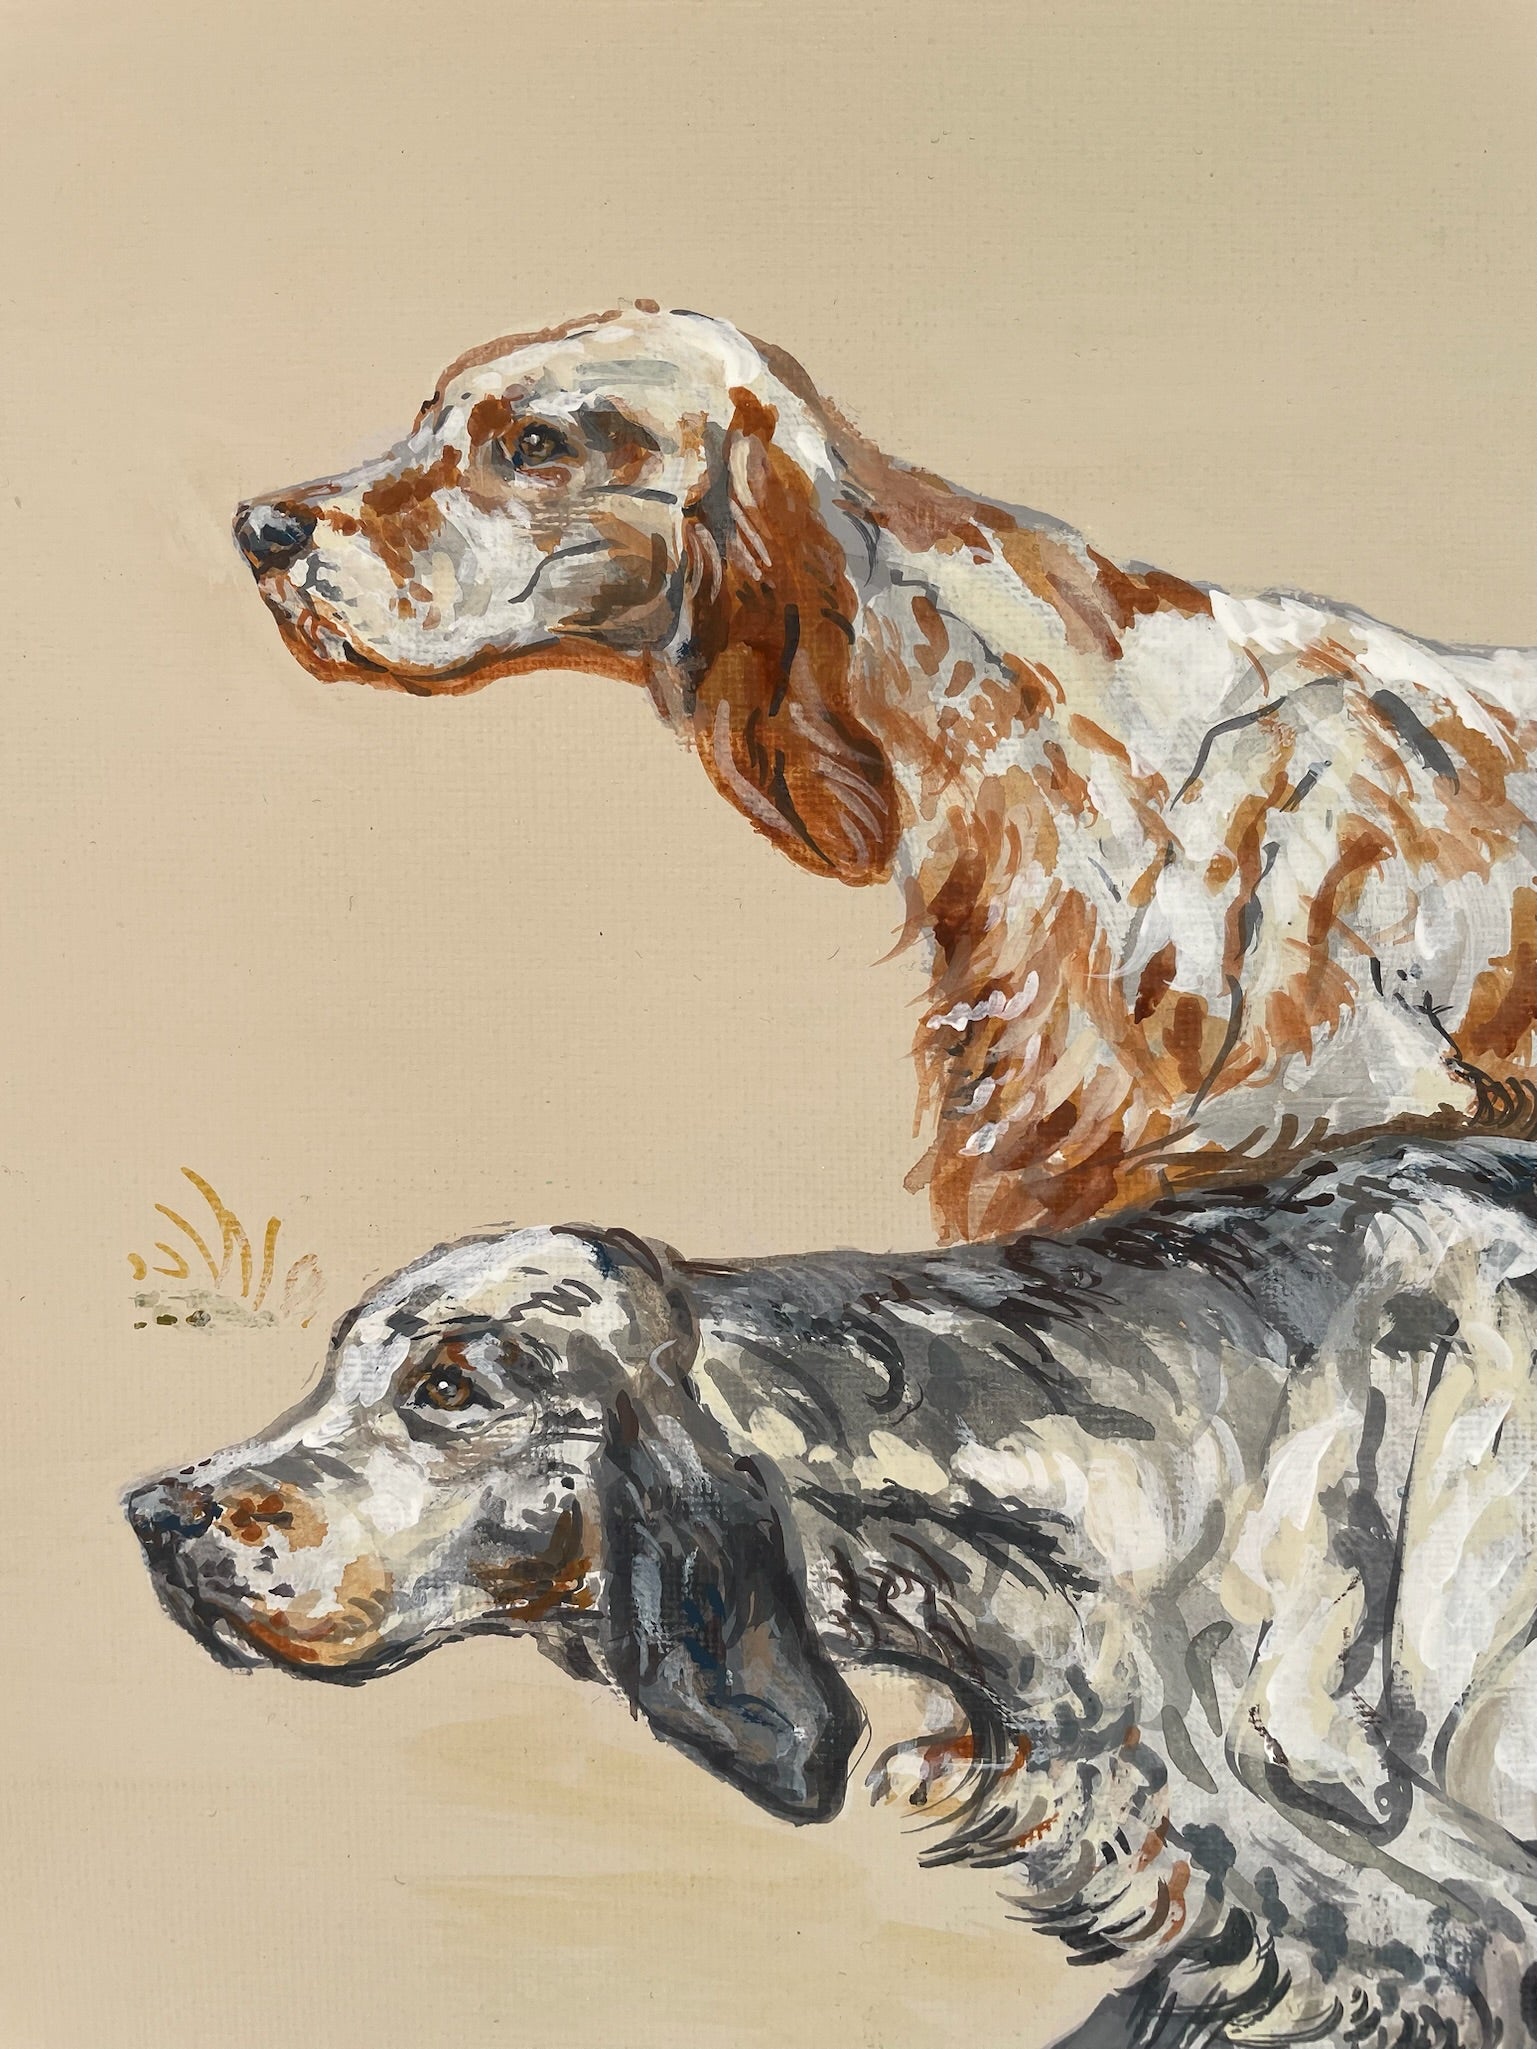 English Setters -  two traditional gundogs hunting.  A painting of a working dog breed inspired by old country sporting prints.